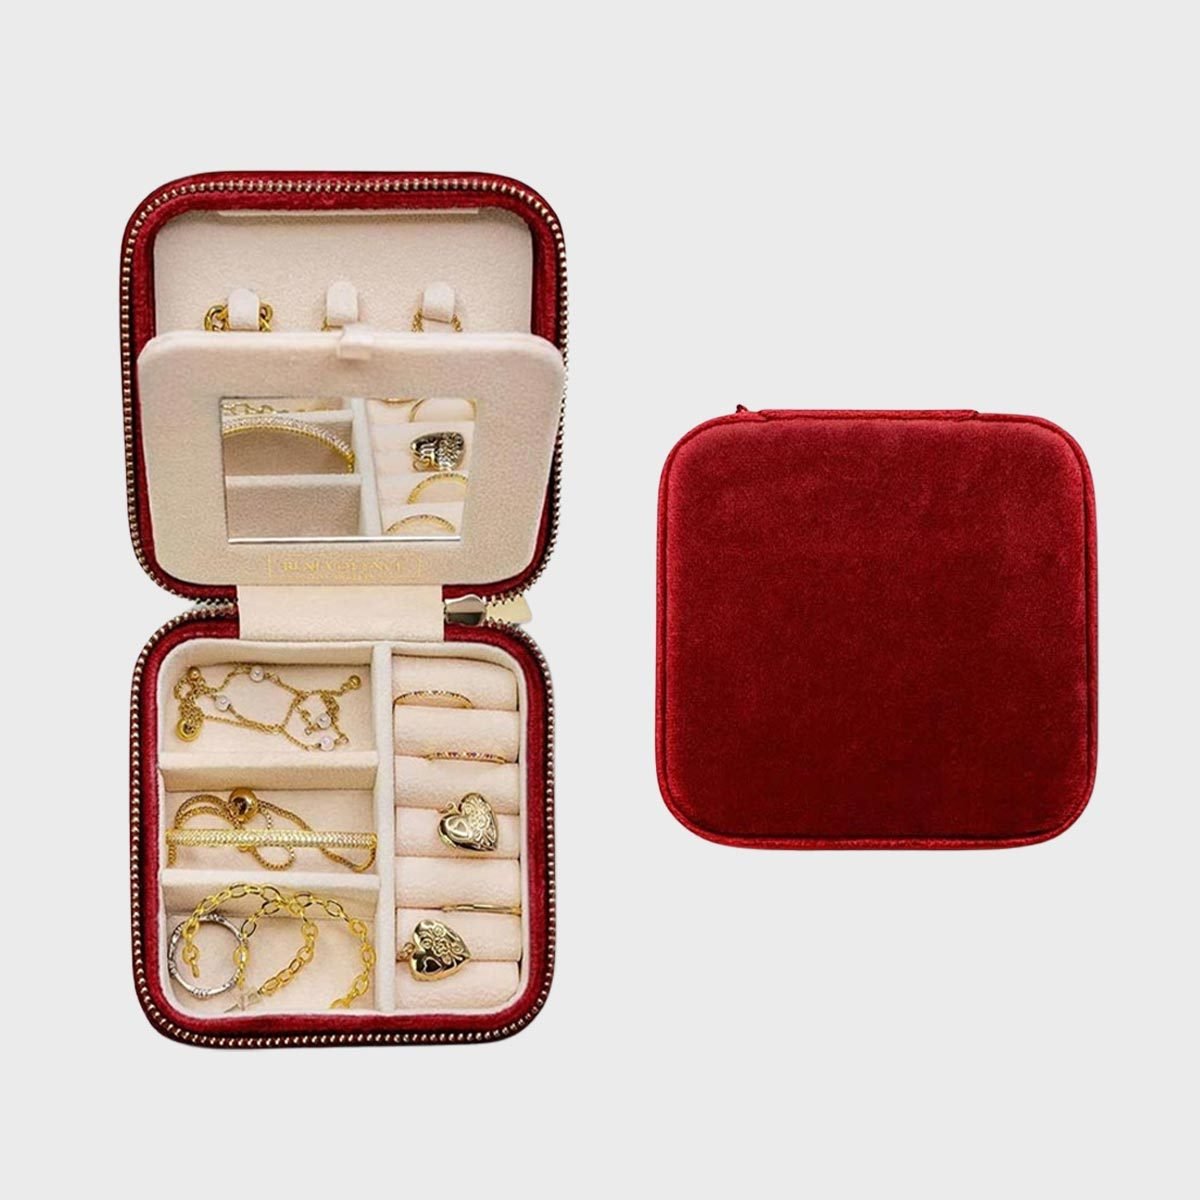 <p>When it comes to Amazon travel accessories, this plush velvet <a href="https://www.amazon.com/Benevolence-Plush-Velvet-Travel-Jewelry-Organizer-Necklaces/dp/B0BBVR6HYG" rel="noopener">compact jewelry box</a> is an affordable way to keep your baubles safe and tangle-free. The <a href="https://www.rd.com/list/best-travel-jewelry-case/">travel jewelry case</a> has a built-in mirror and several separate compartments, including a secret space for earrings or other valuables. The handheld design comes in fun colors, like red emerald green, cyan blue and dusty pink. And if you're looking for the best way to store your accessories at home, consider these <a href="https://www.rd.com/list/jewelry-organizers/" rel="noopener noreferrer">jewelry organizers</a>.</p> <p class="listicle-page__cta-button-shop"><a class="shop-btn" href="https://www.amazon.com/Benevolence-Plush-Velvet-Travel-Jewelry-Organizer-Necklaces/dp/B0BBVR6HYG">Shop Now</a></p>